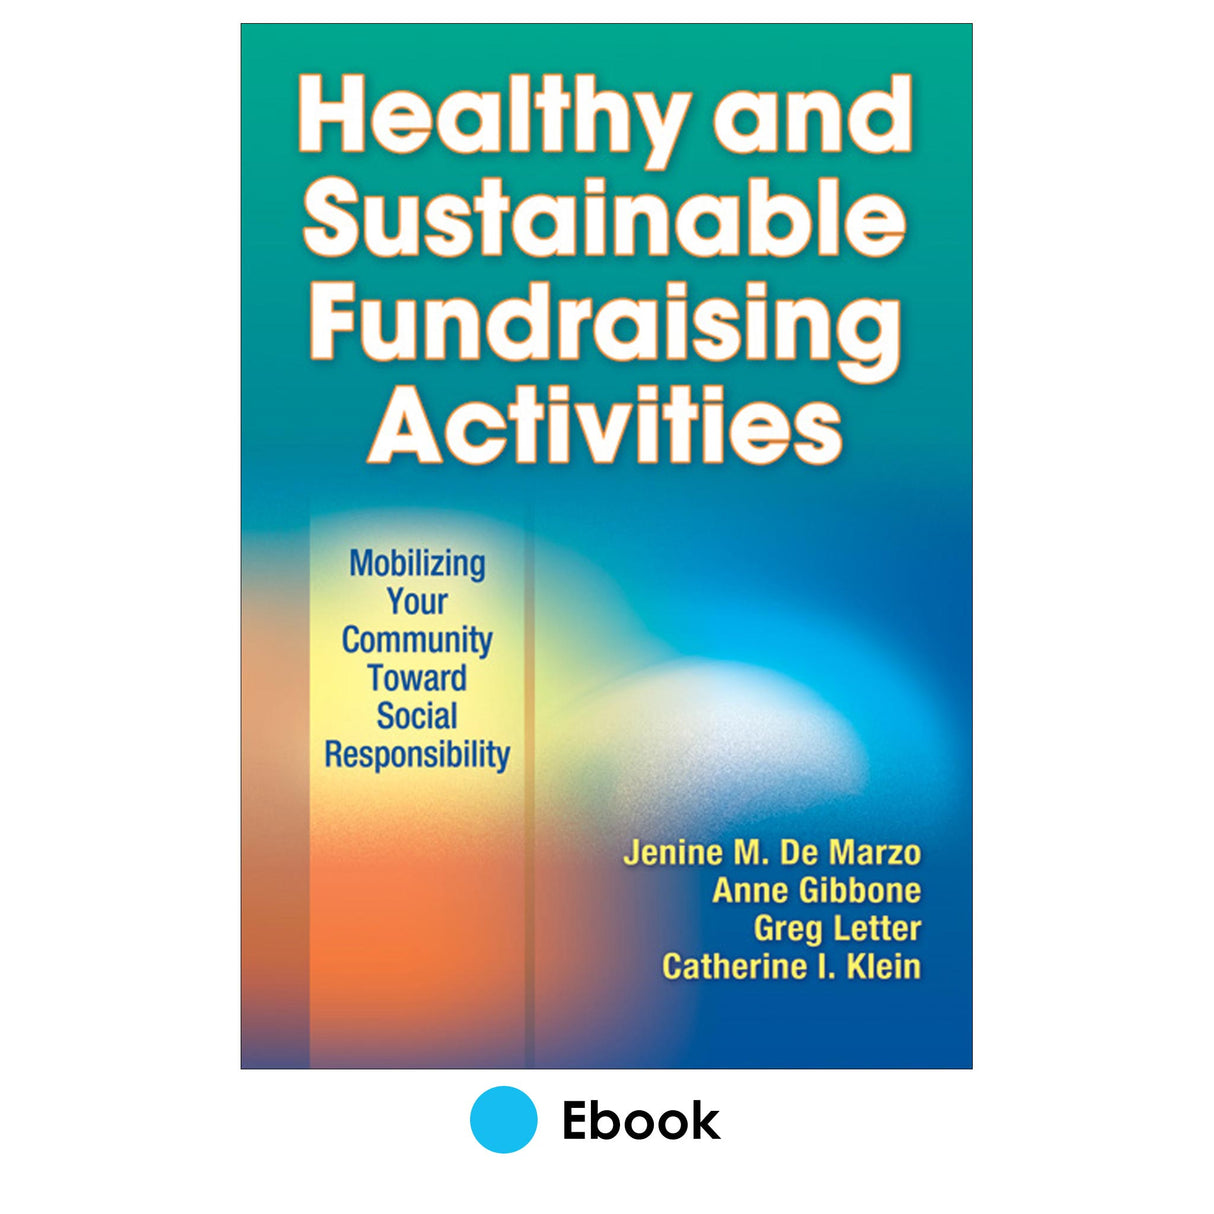 Healthy and Sustainable Fundraising Activities PDF